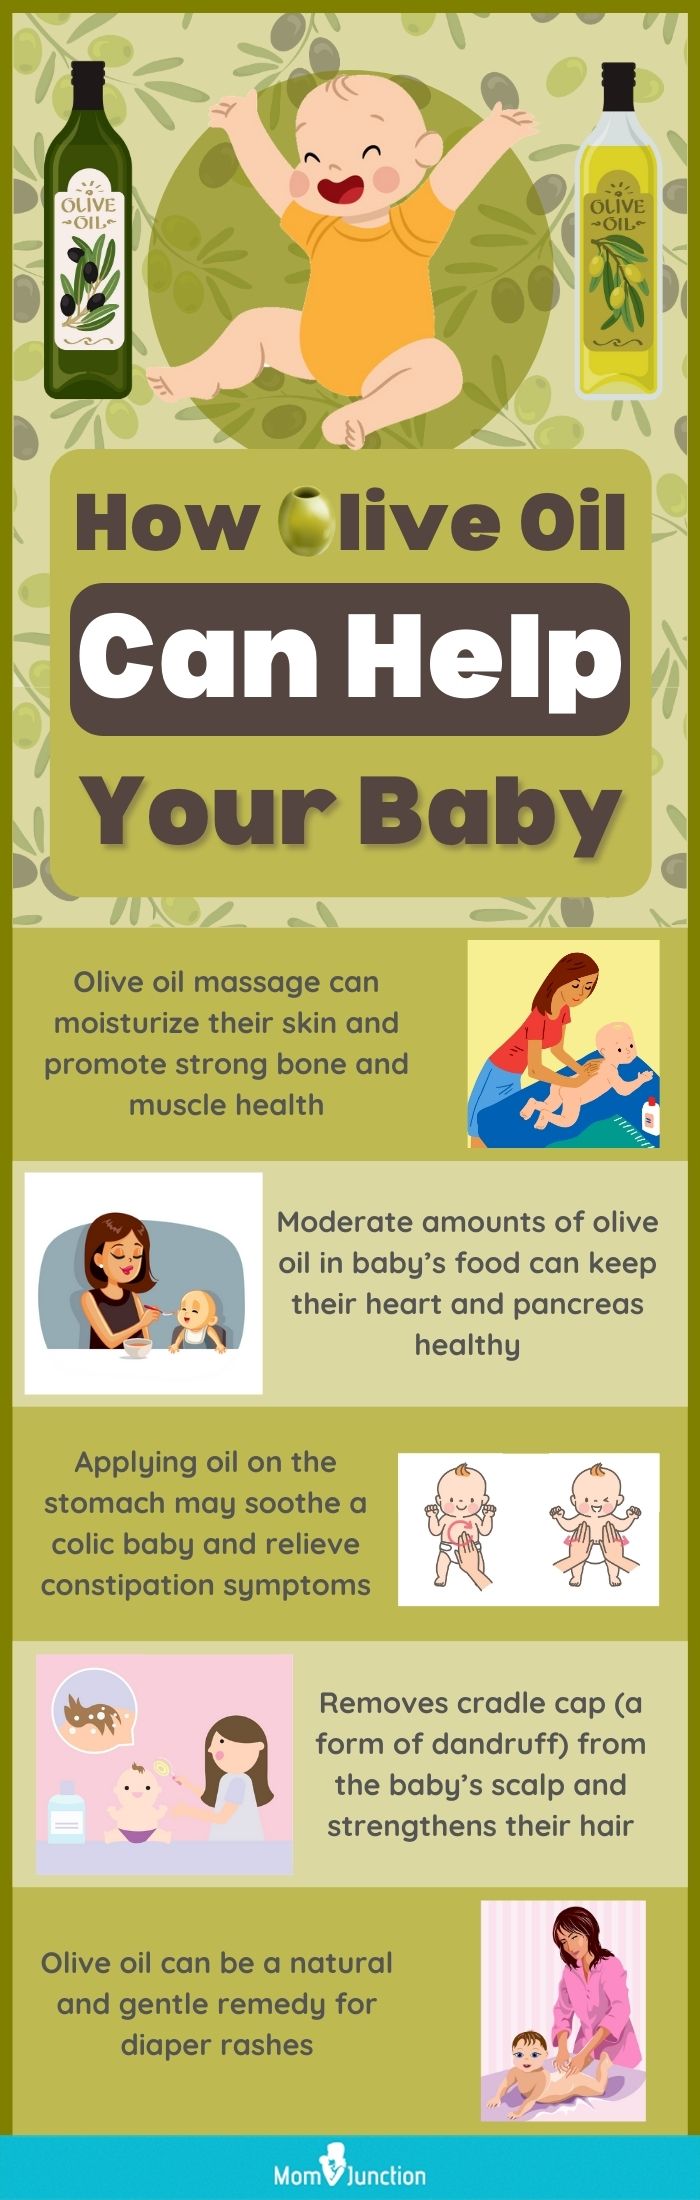 Olive Oil Uses Health Benefits For Skin, Hair And Body Ideas That You